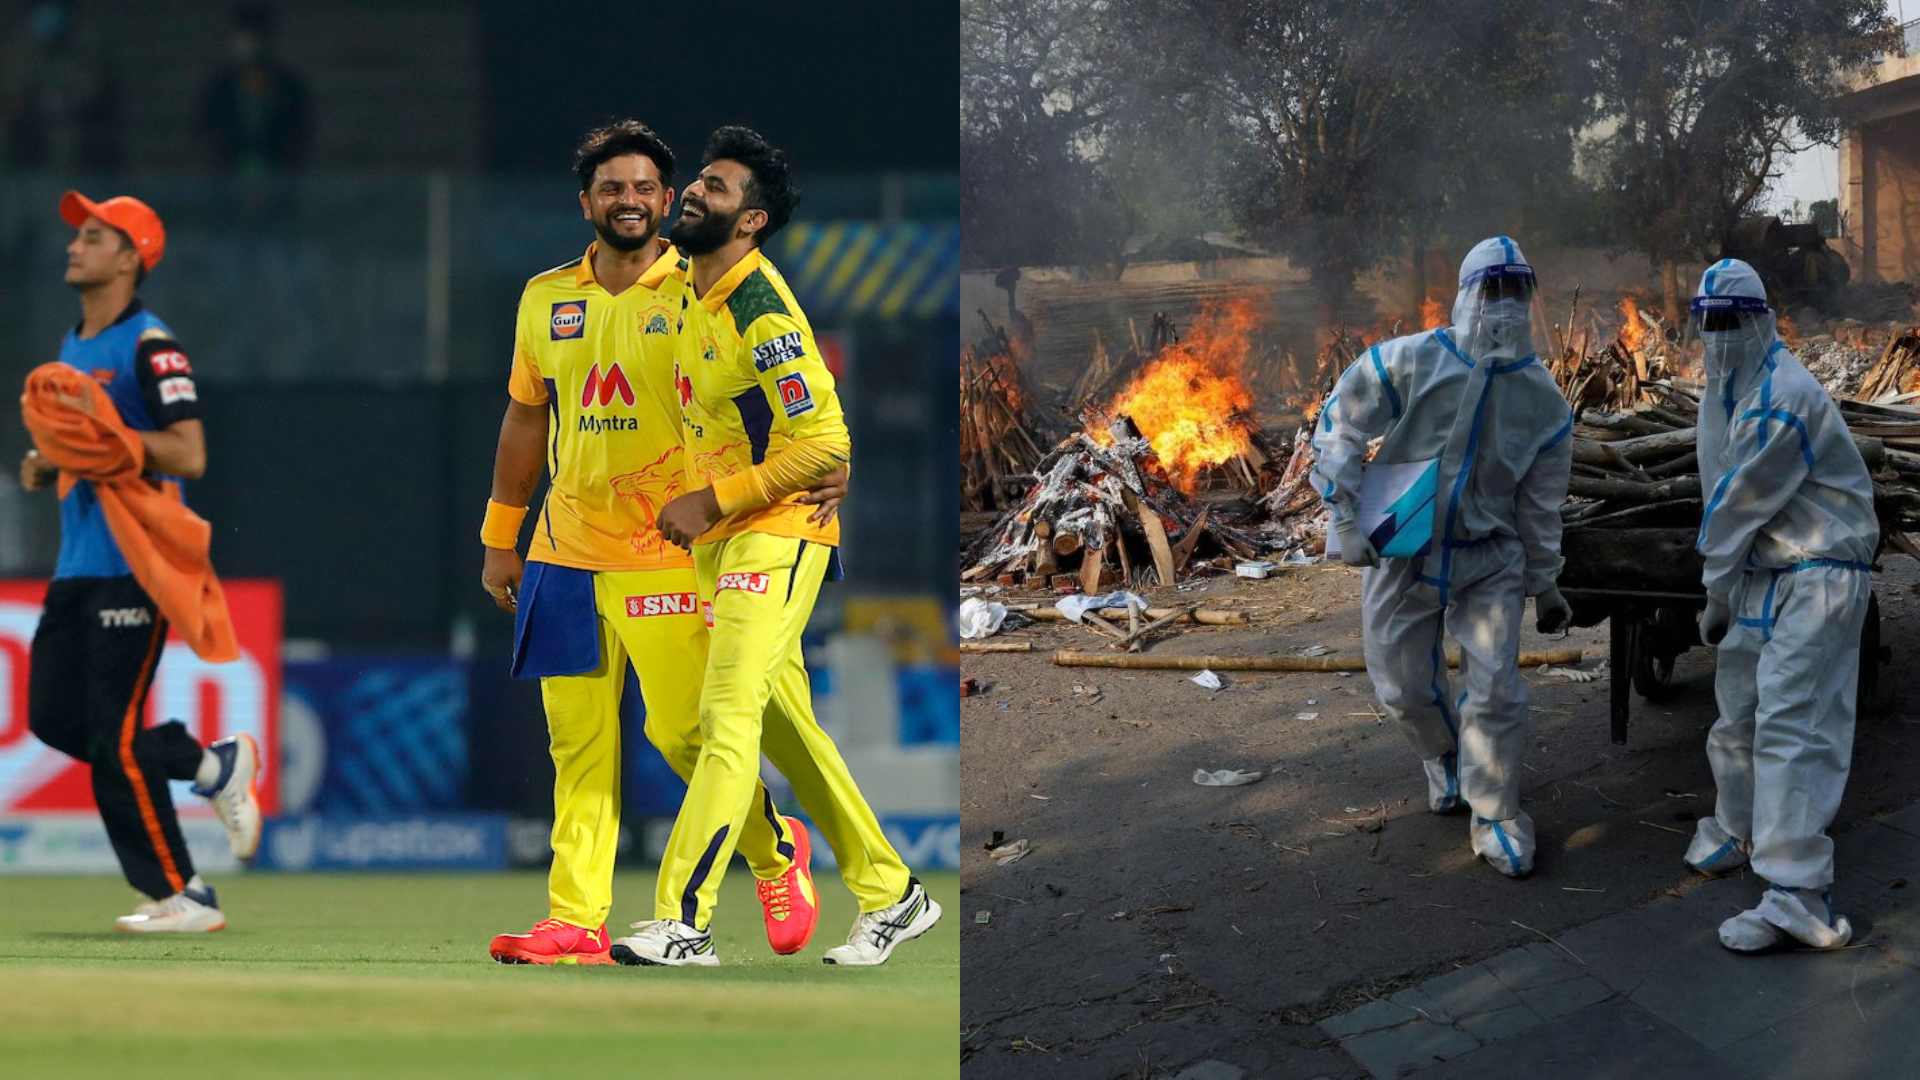 The IPL 2021 has been targeted as it has been played amidst the ravaging second wave of the coronavirus pandemic in India.